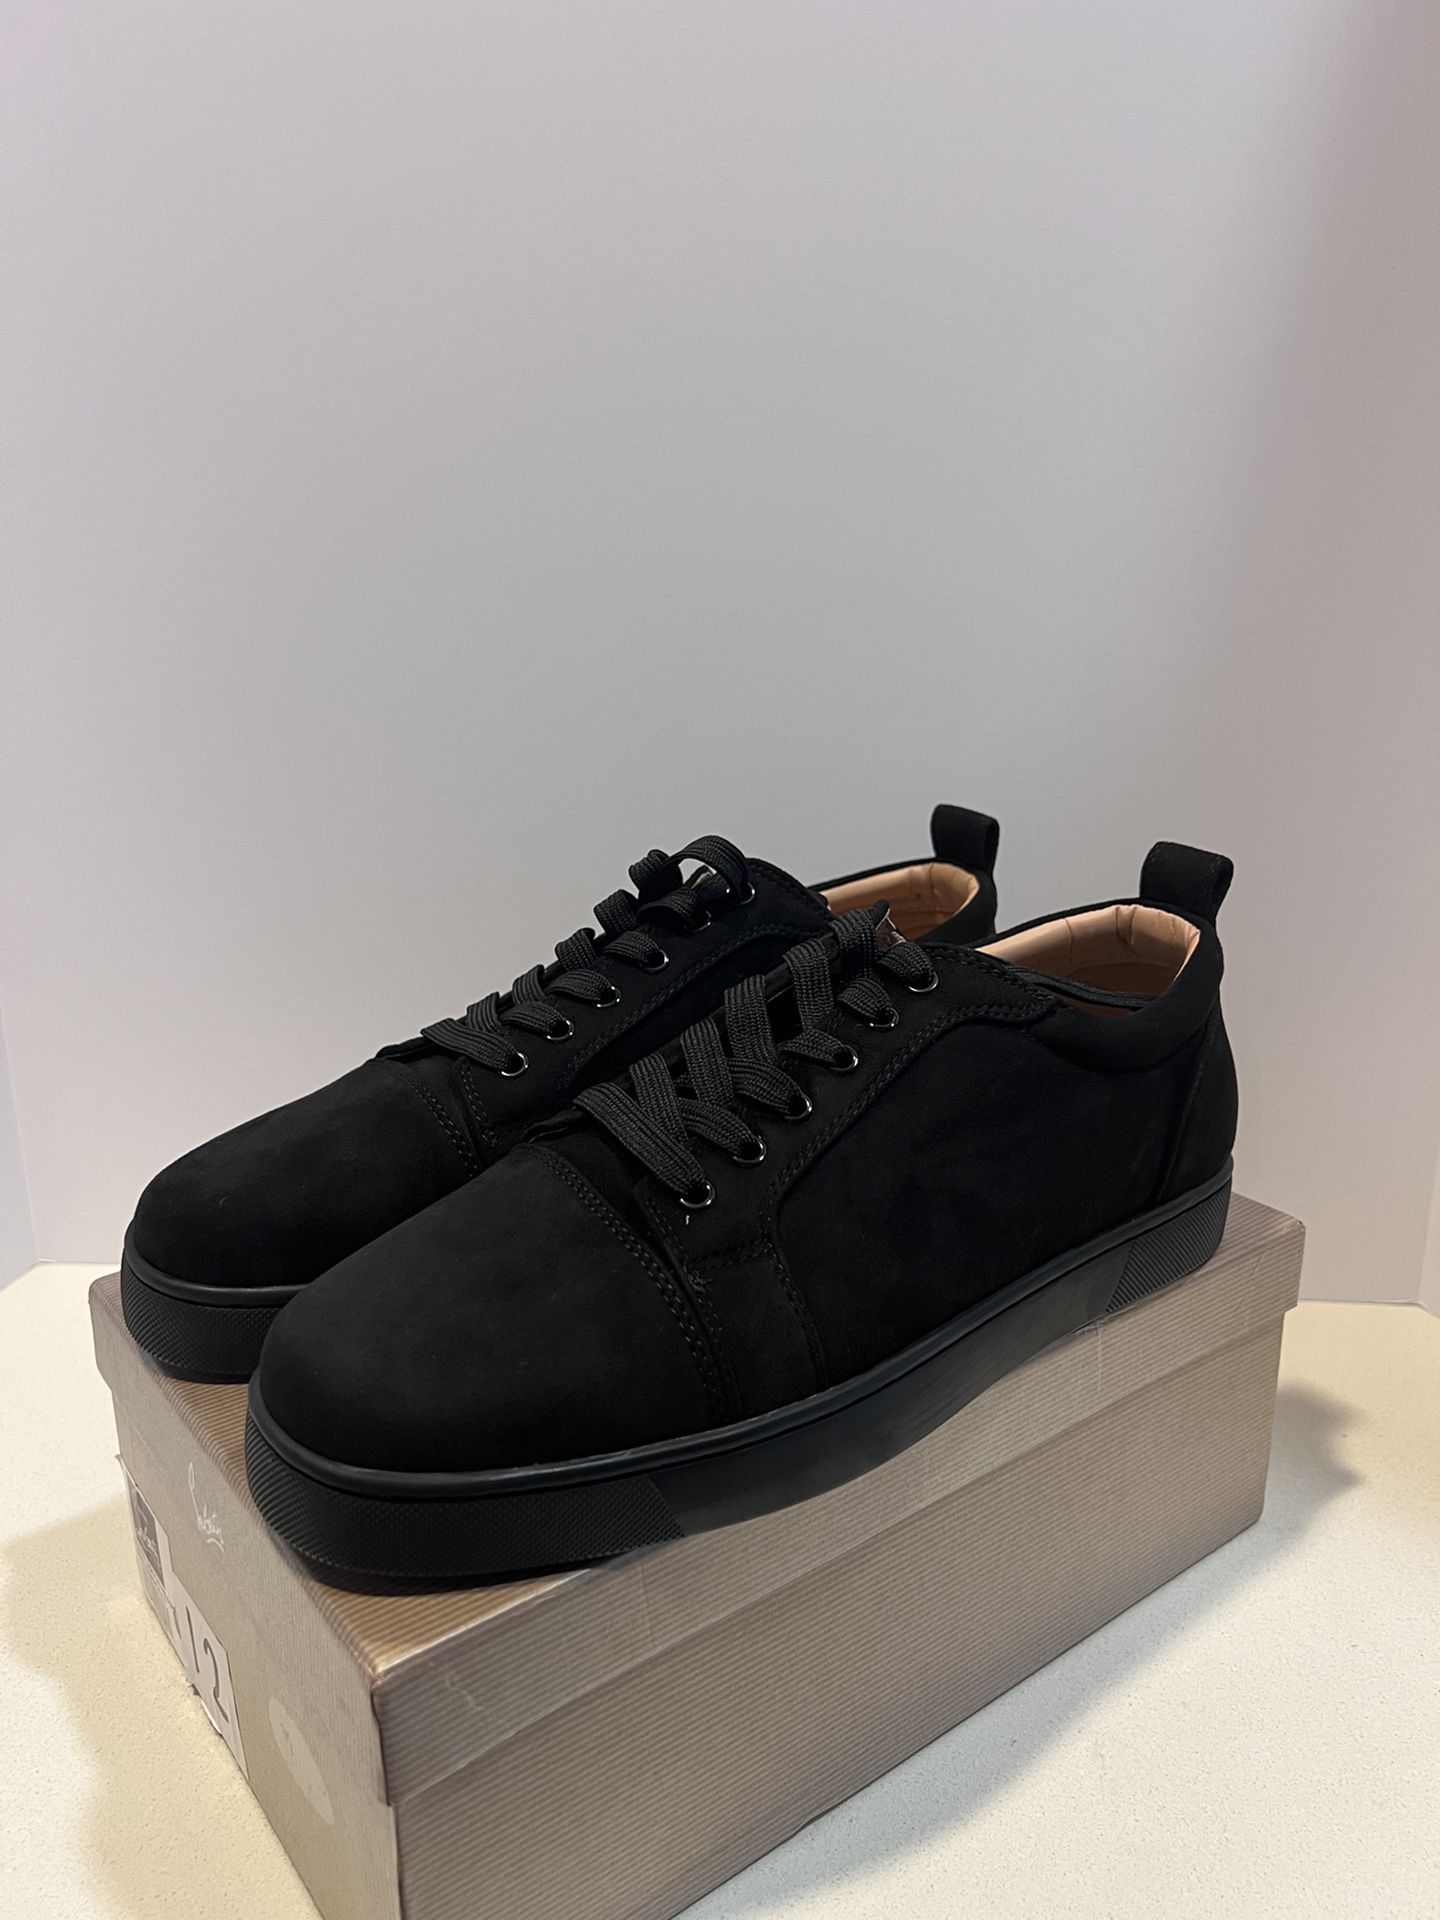 CL Black Red Bottom Sneakers for Sale in Milpitas, CA - OfferUp